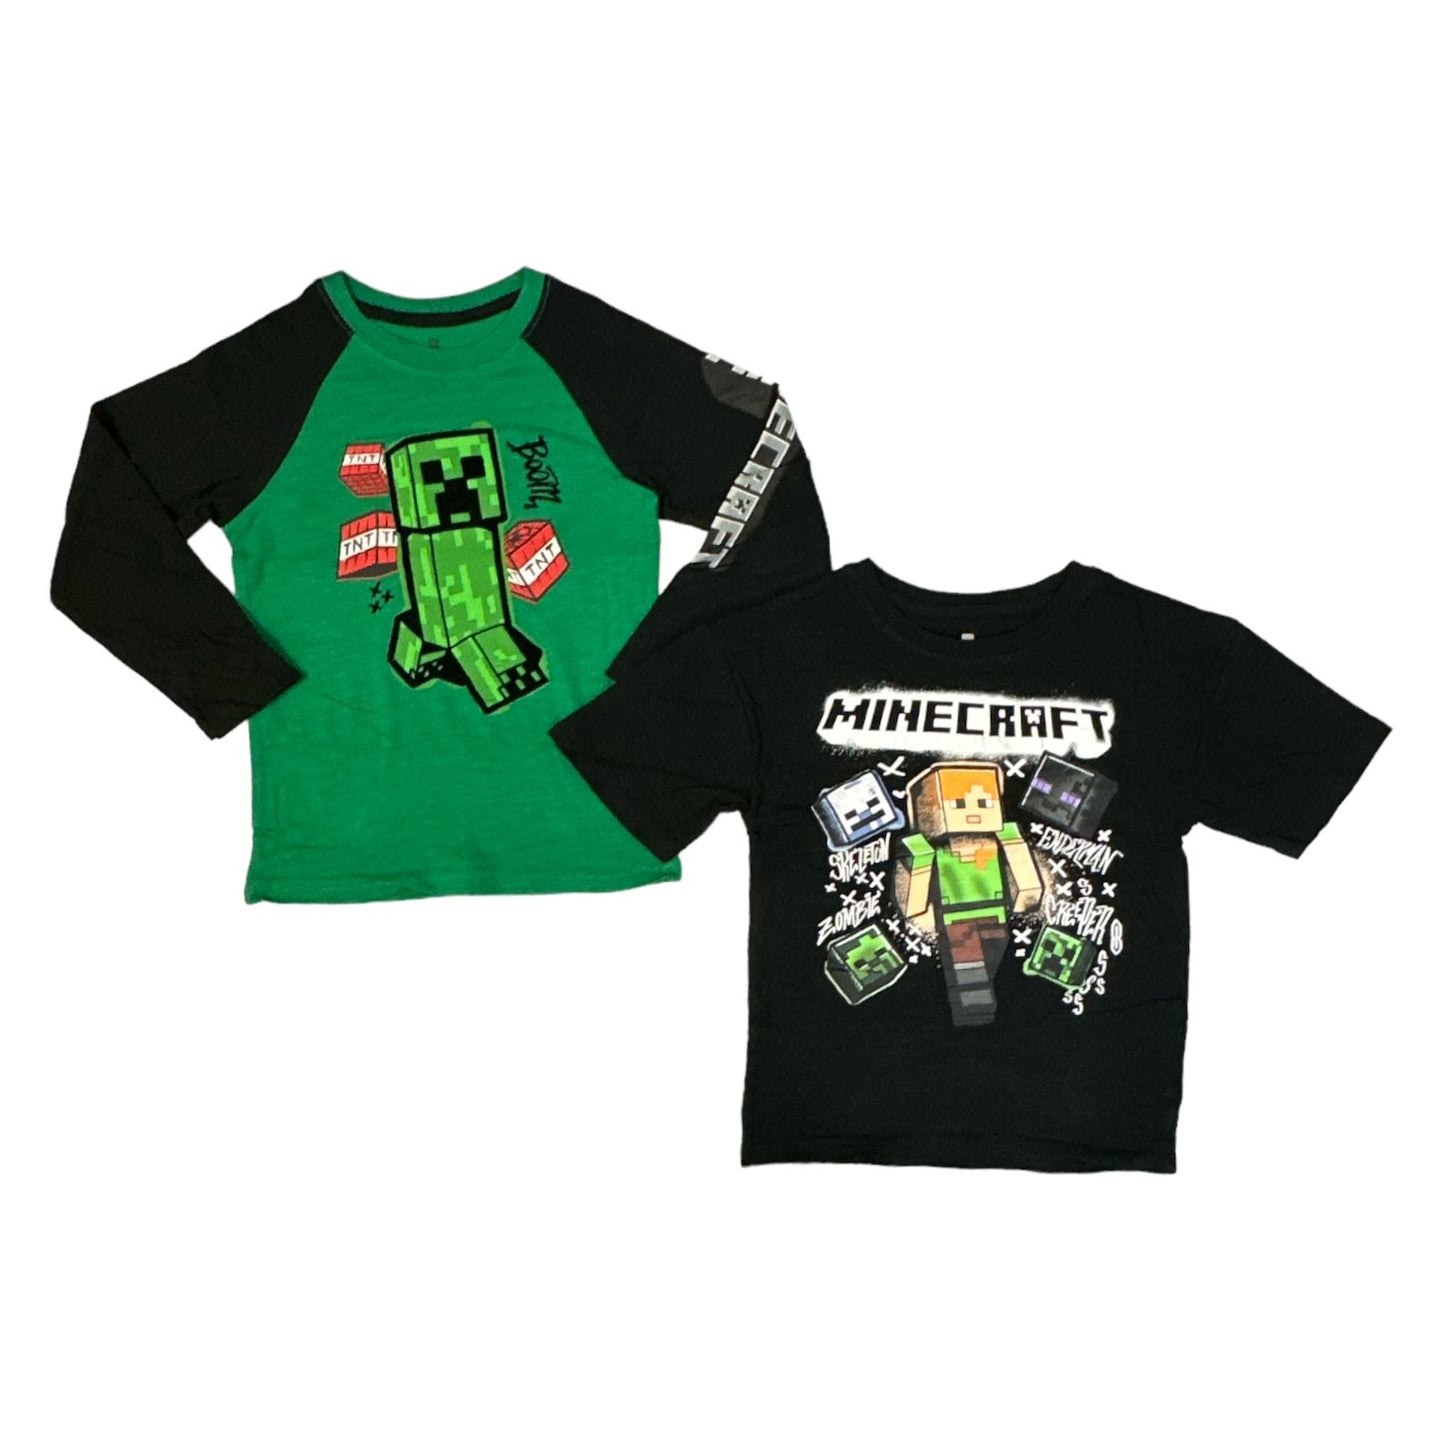 Minecraft Boy's 2-Pack Graphic Print Short & Long Sleeve Fashion Tops